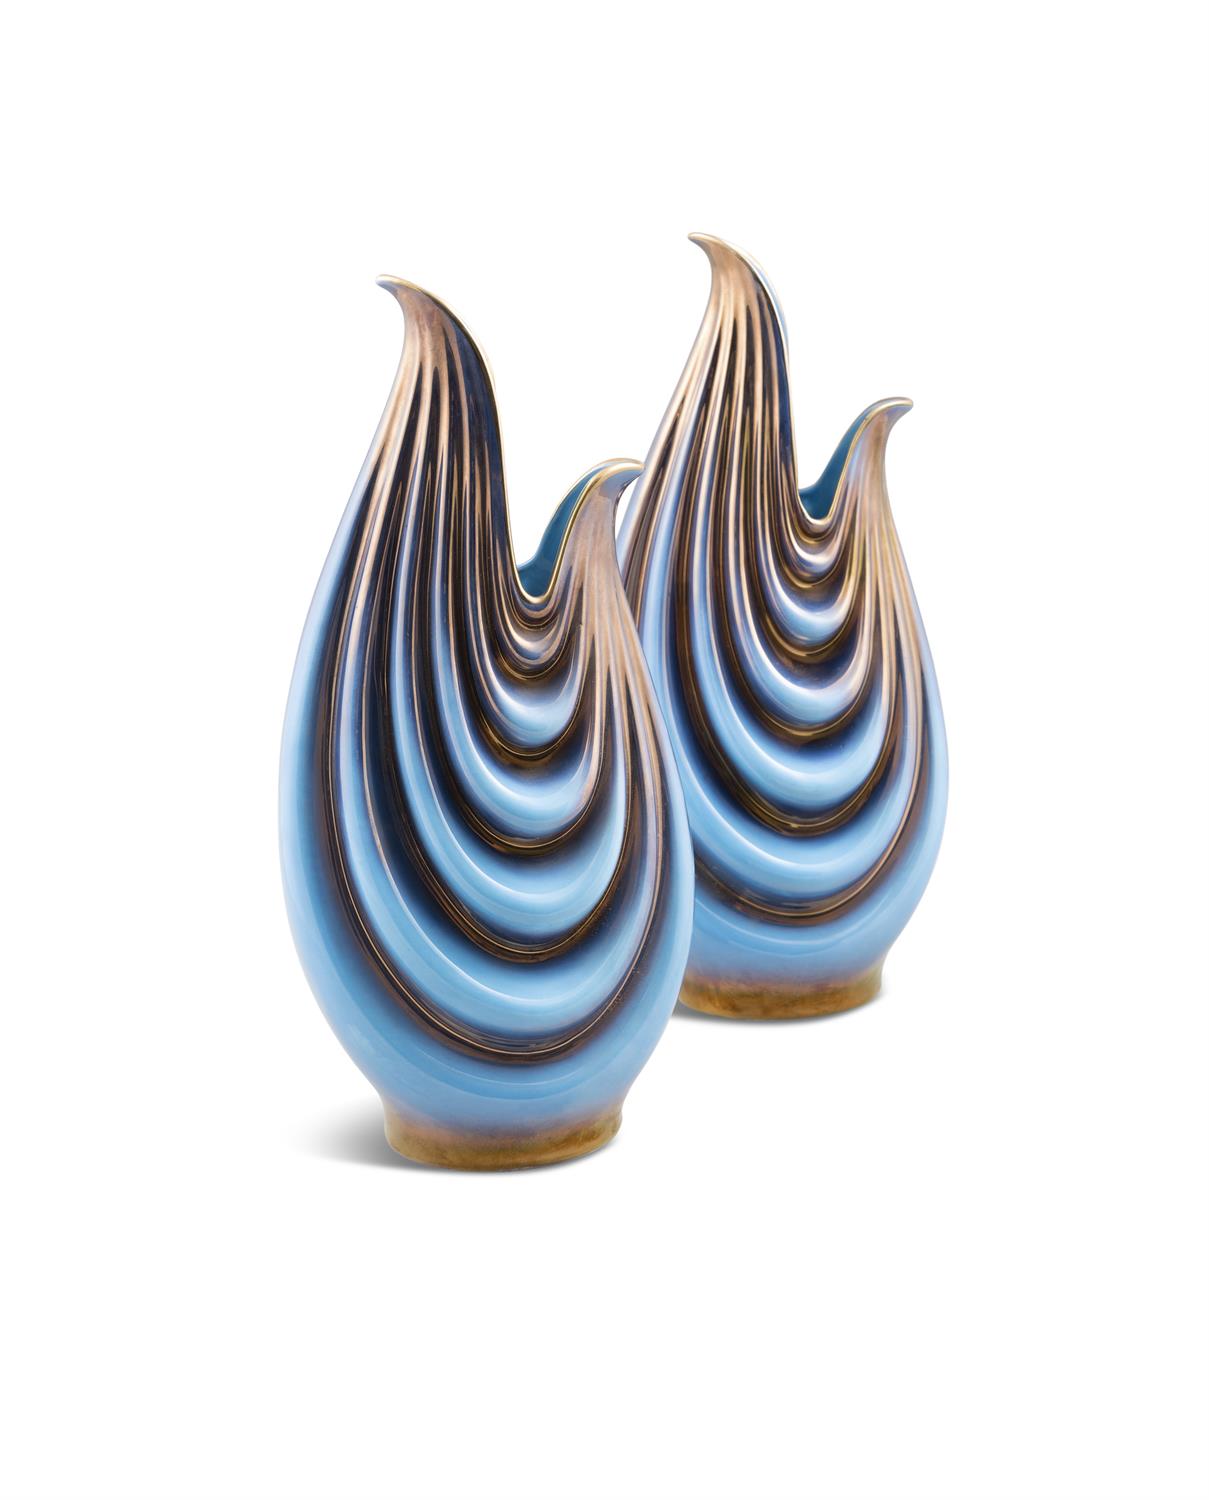 SICAS SESTO FIOR A pair of ceramic vases by Sicas Sesto Fior. Italy, c. 1970, with maker's mark. - Image 5 of 5